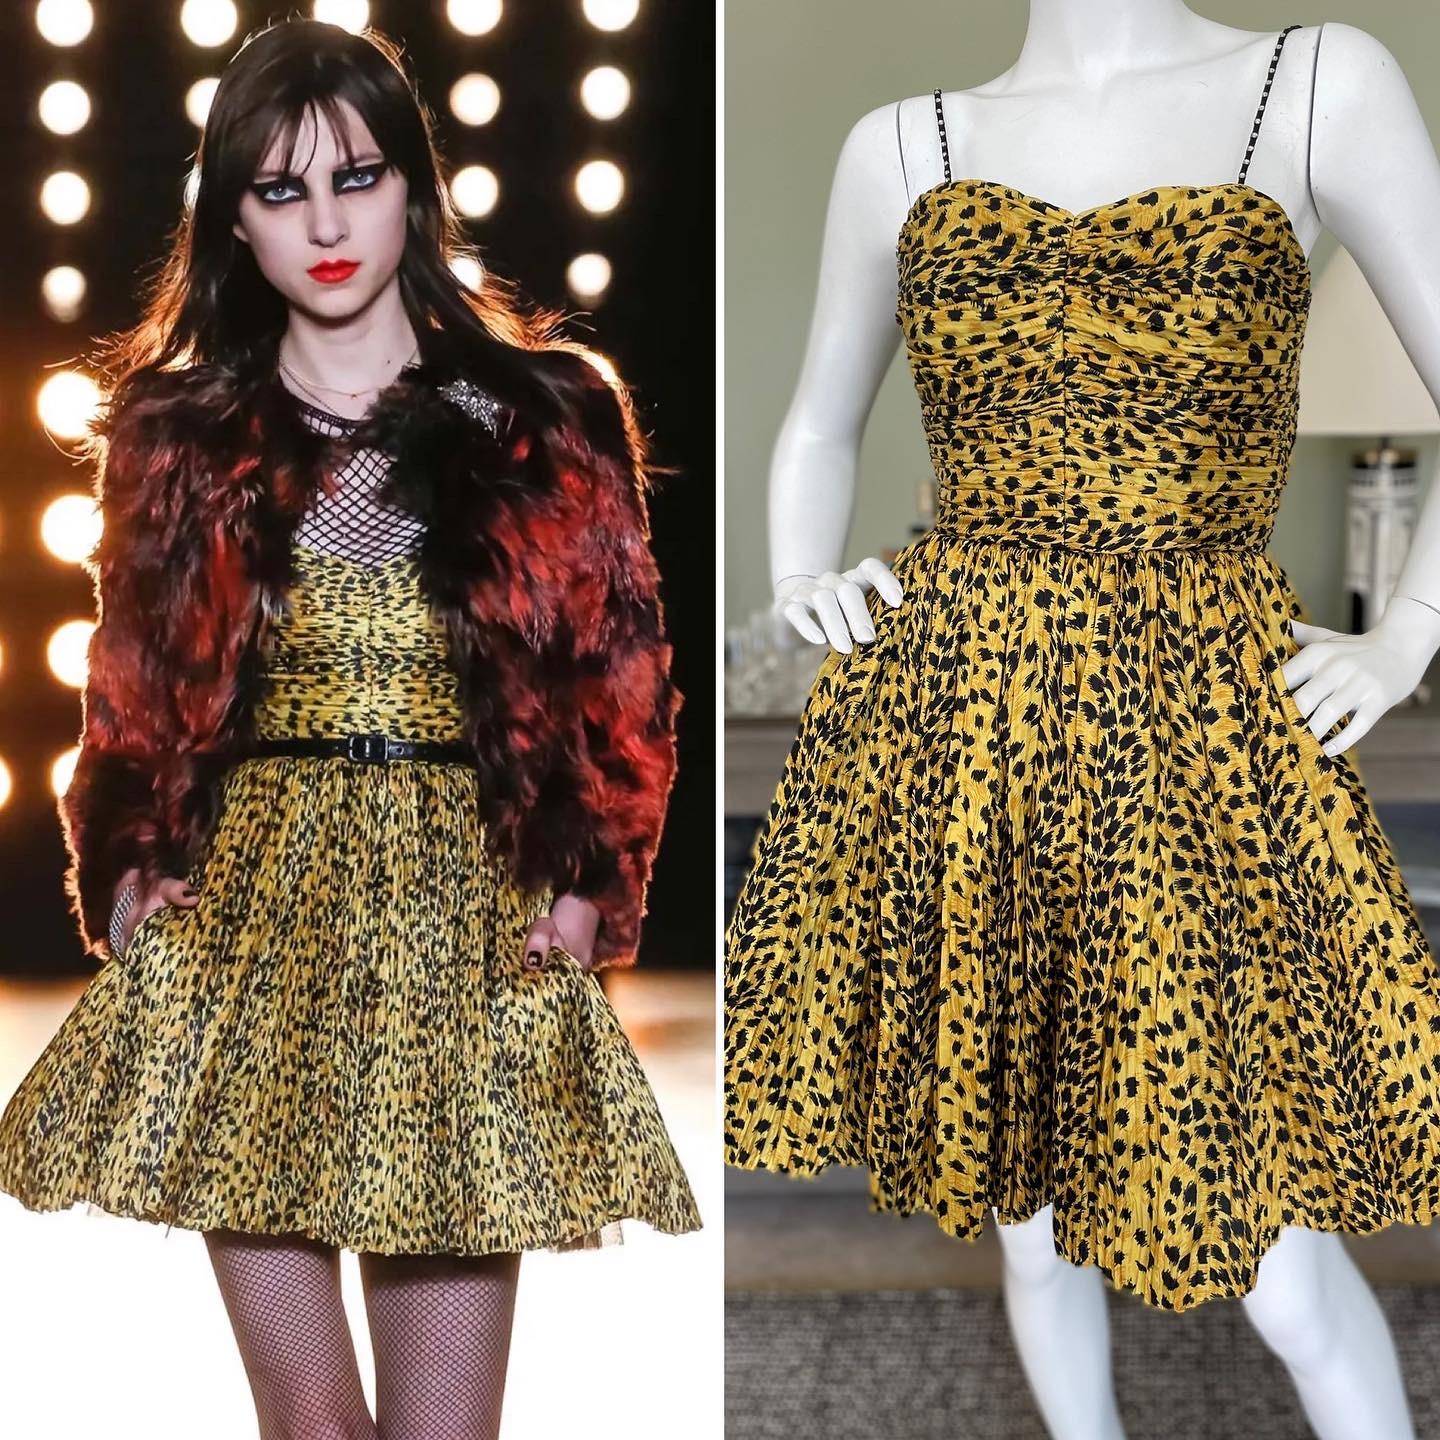 Saint Laurent by Hedi Slimane 2015 Leopard Print Pleated Silk Cocktail Dress.
New with tags, retailed for $2379
Size 36
Bust 30